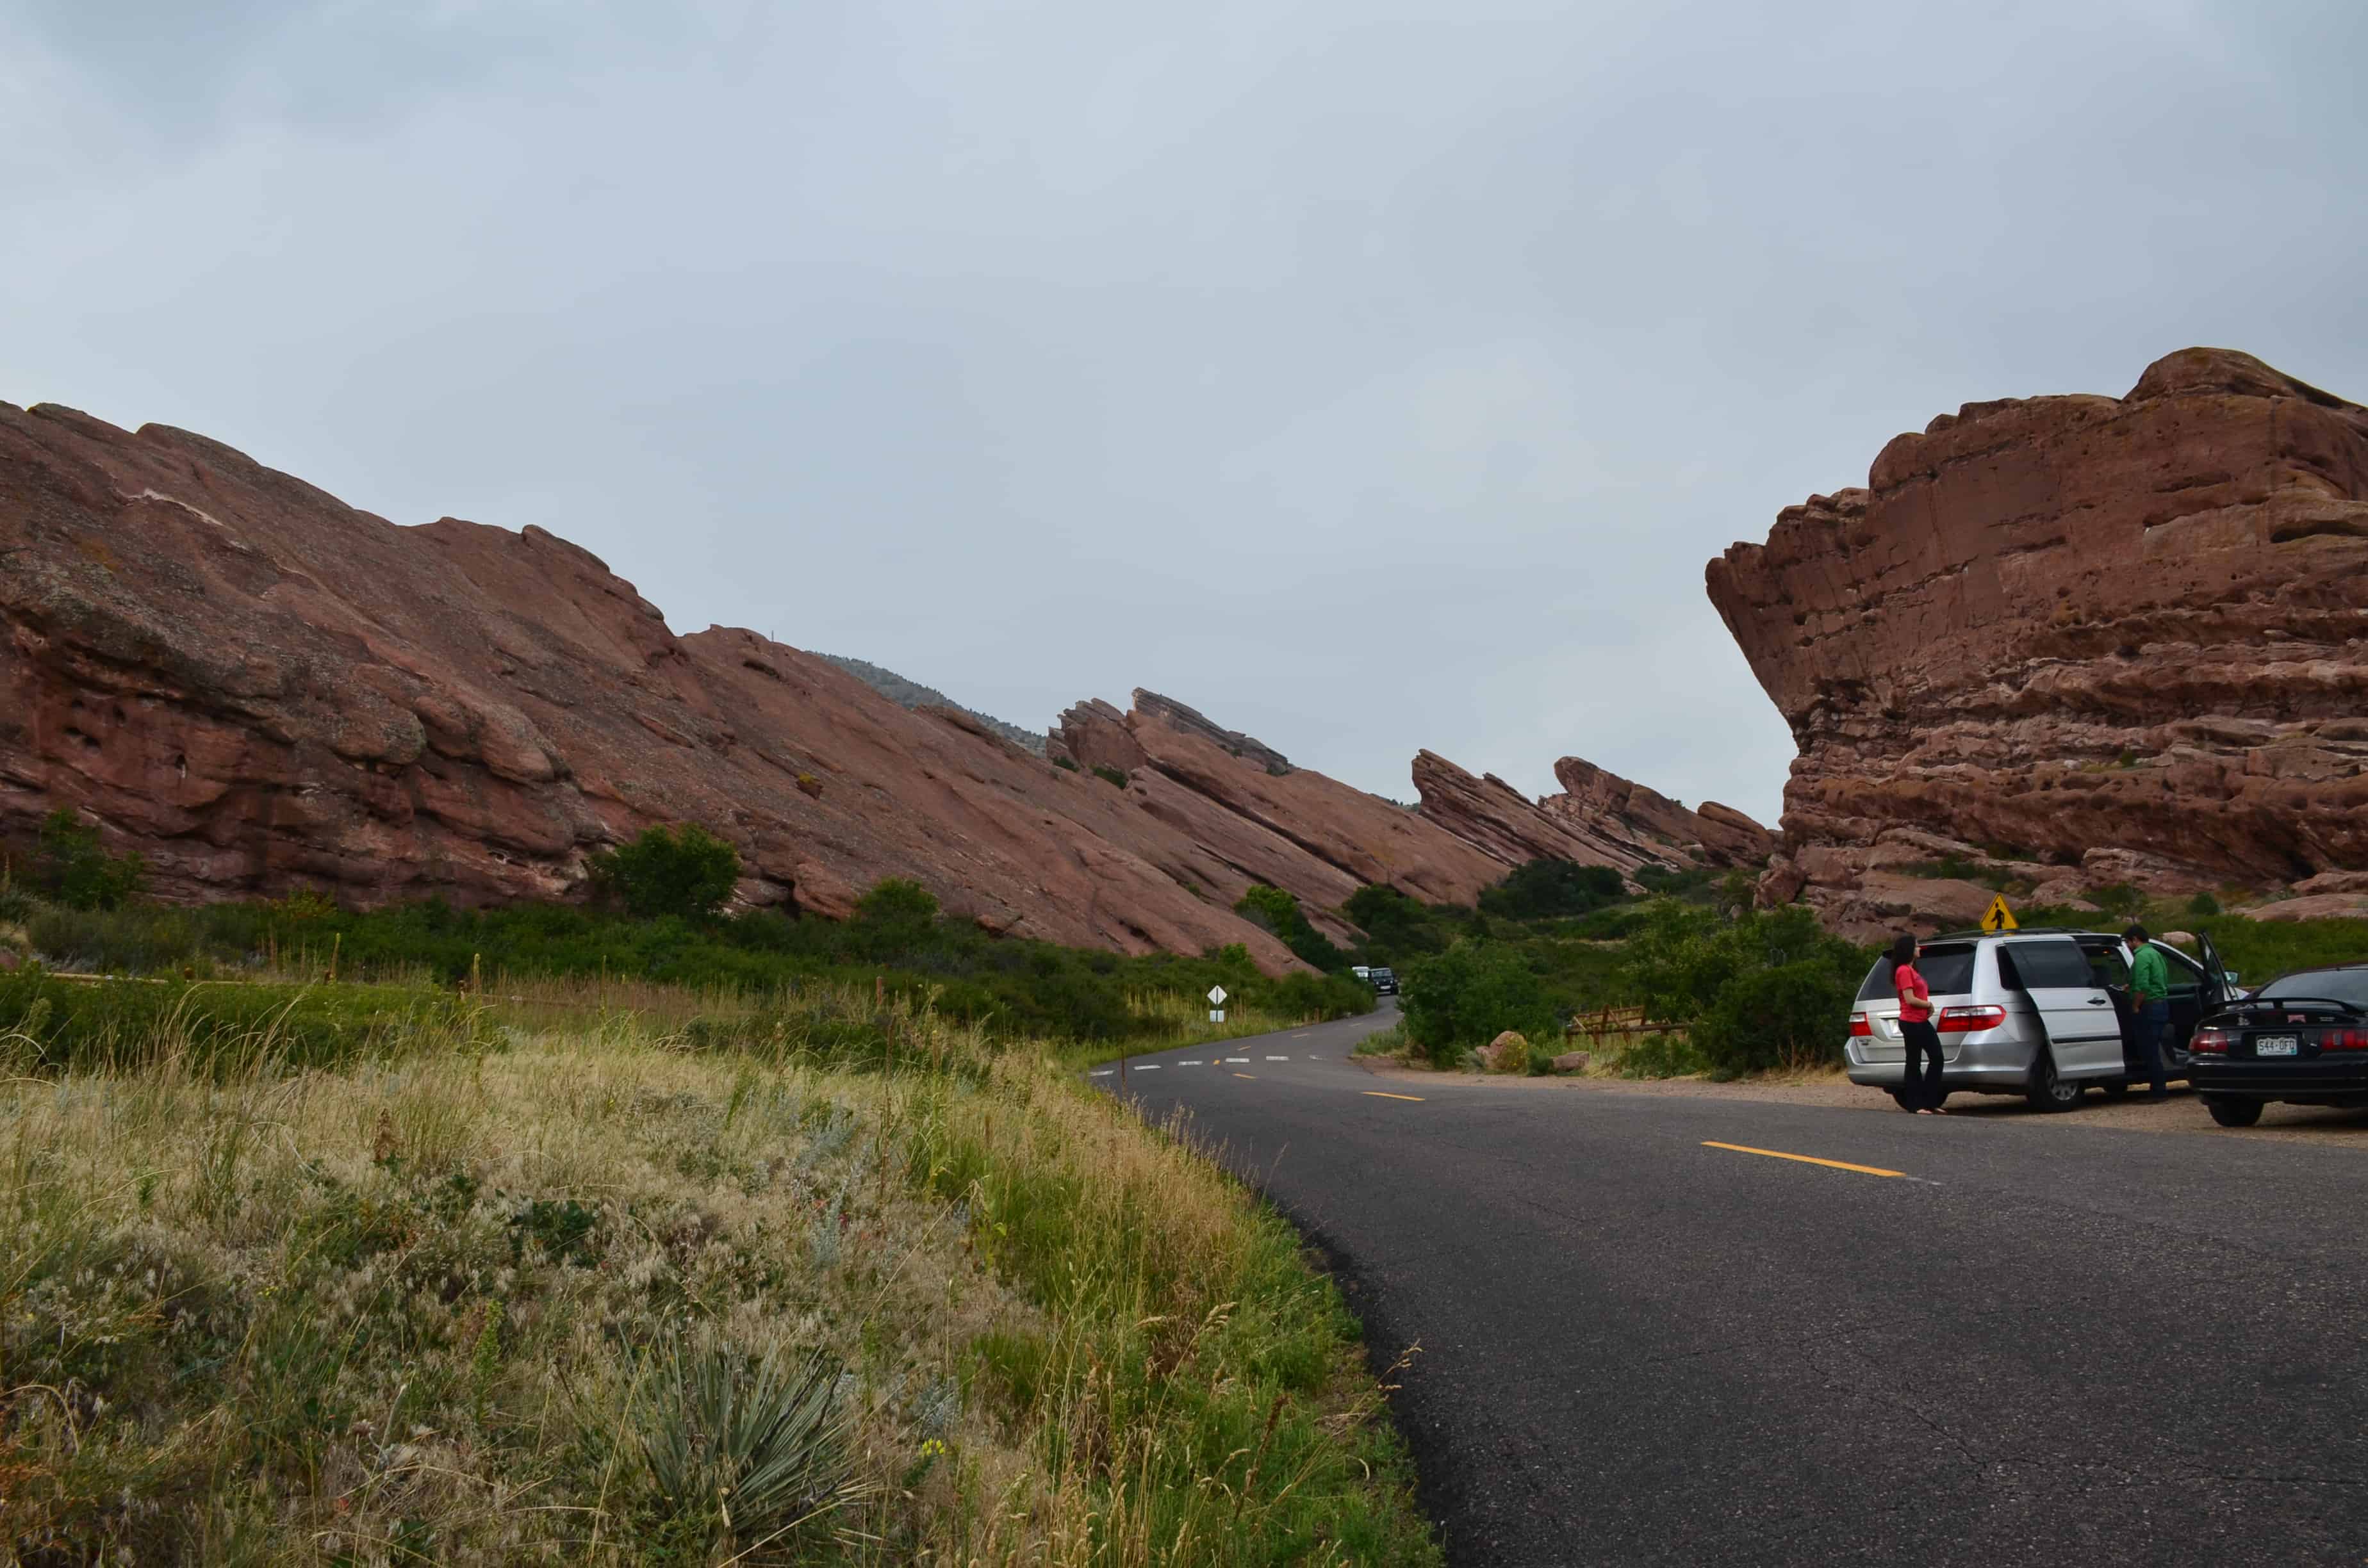 Red Rocks Park and Amphitheatre in Morrison along the Lariat Loop National Scenic Byway in Colorado